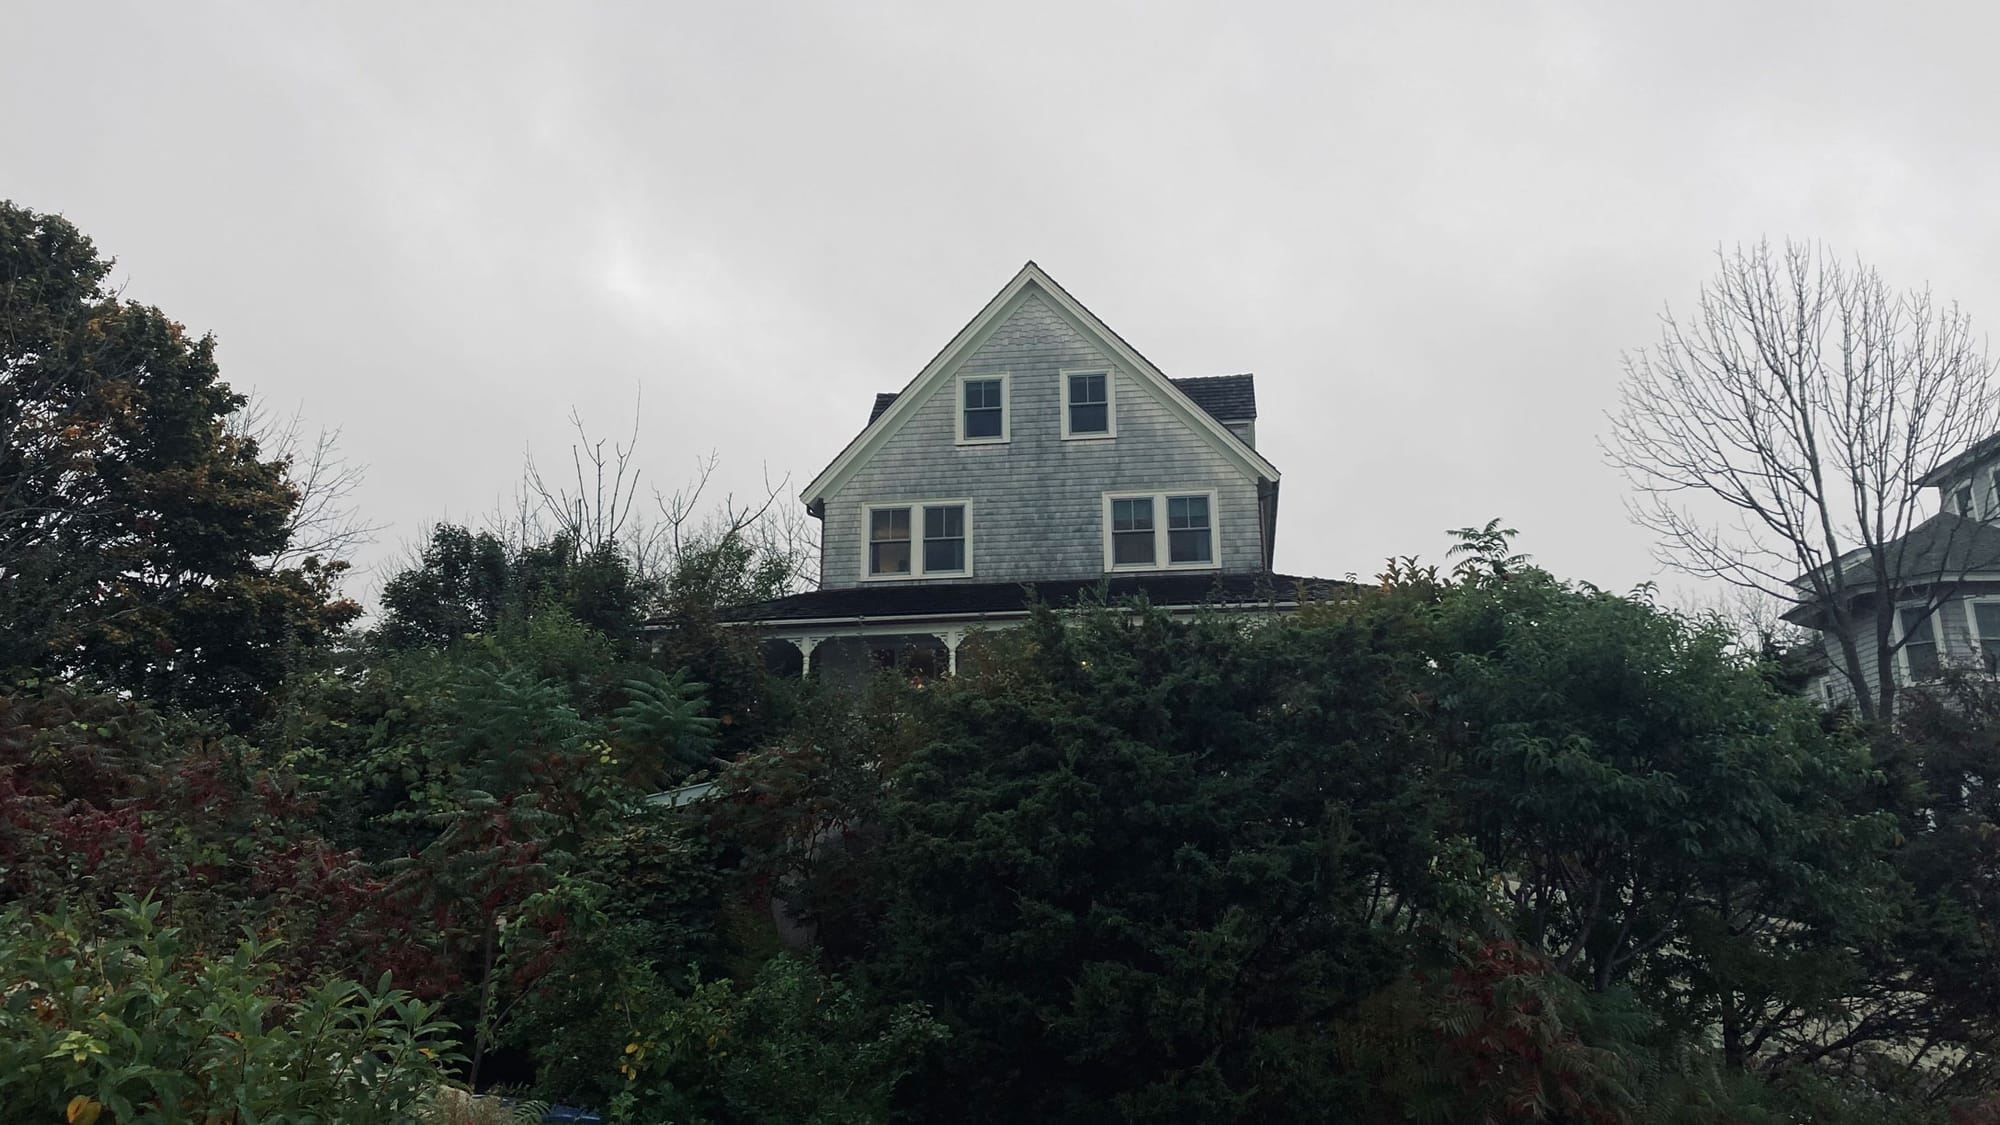 A wooden house stands above a green hillside near the sea in New England on a cloudy day